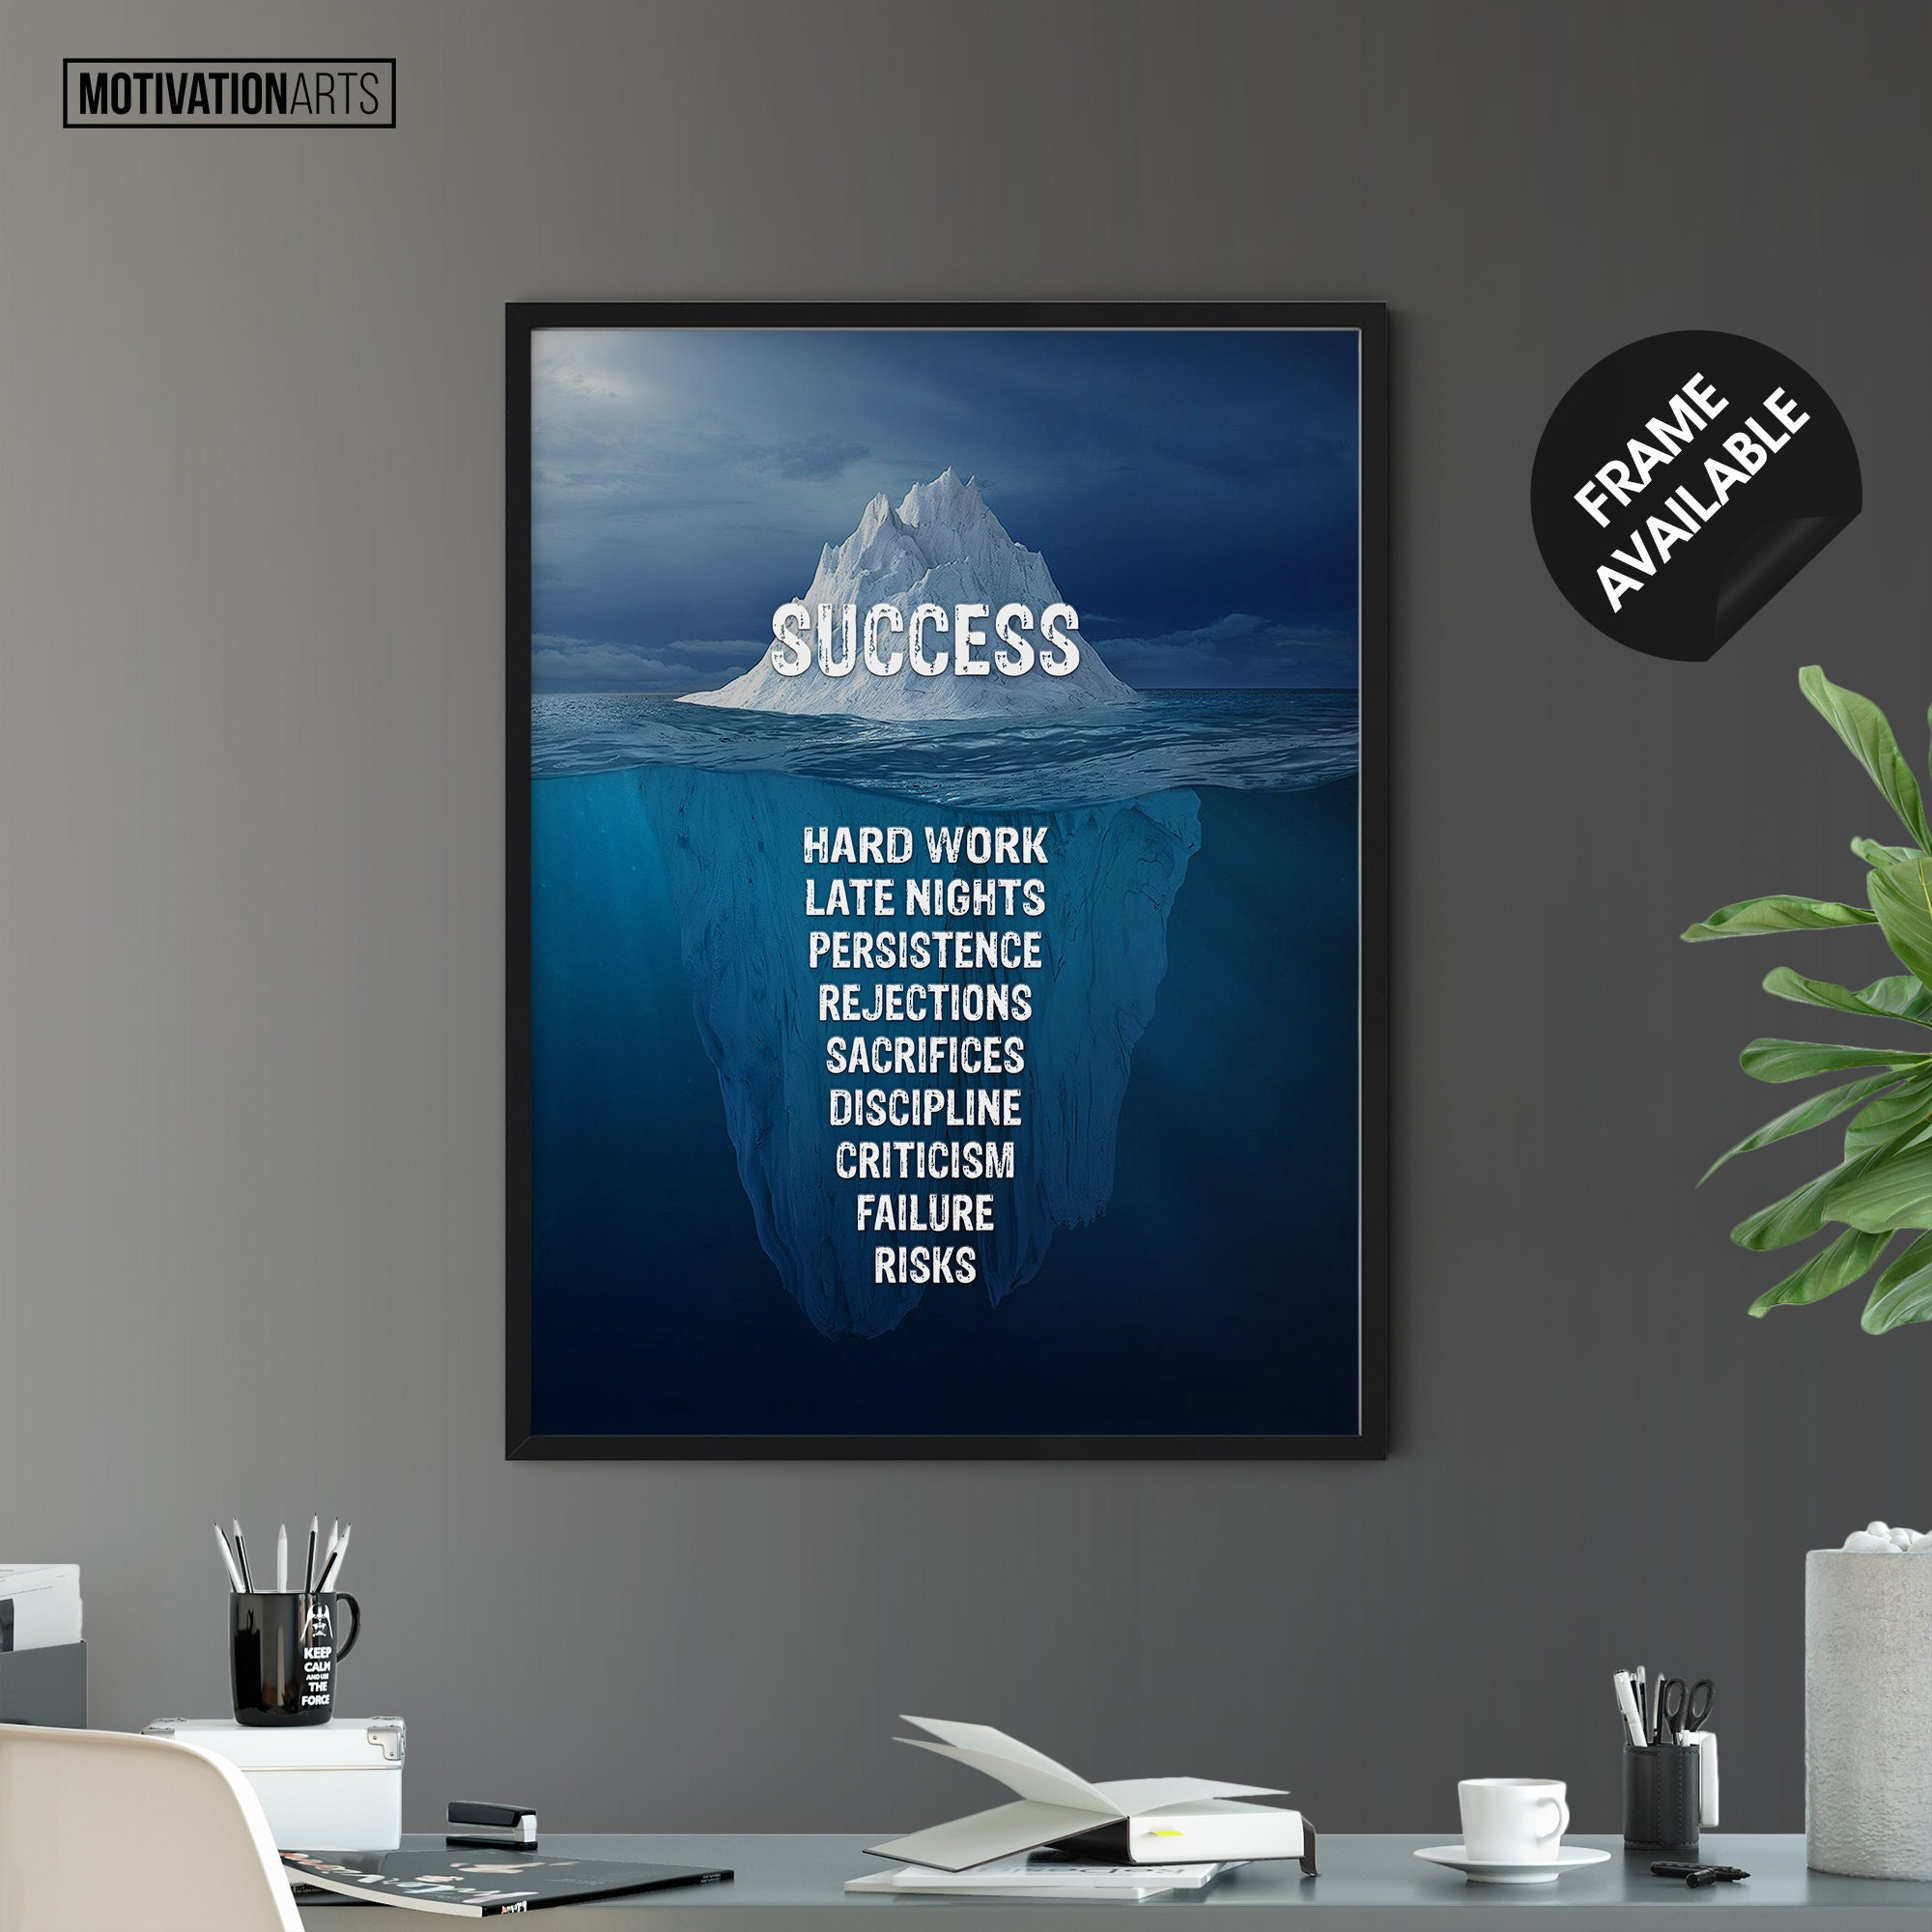 Motivational Inspirational Quote Wall Art Canvas Poster Print Iceberg Of Success 